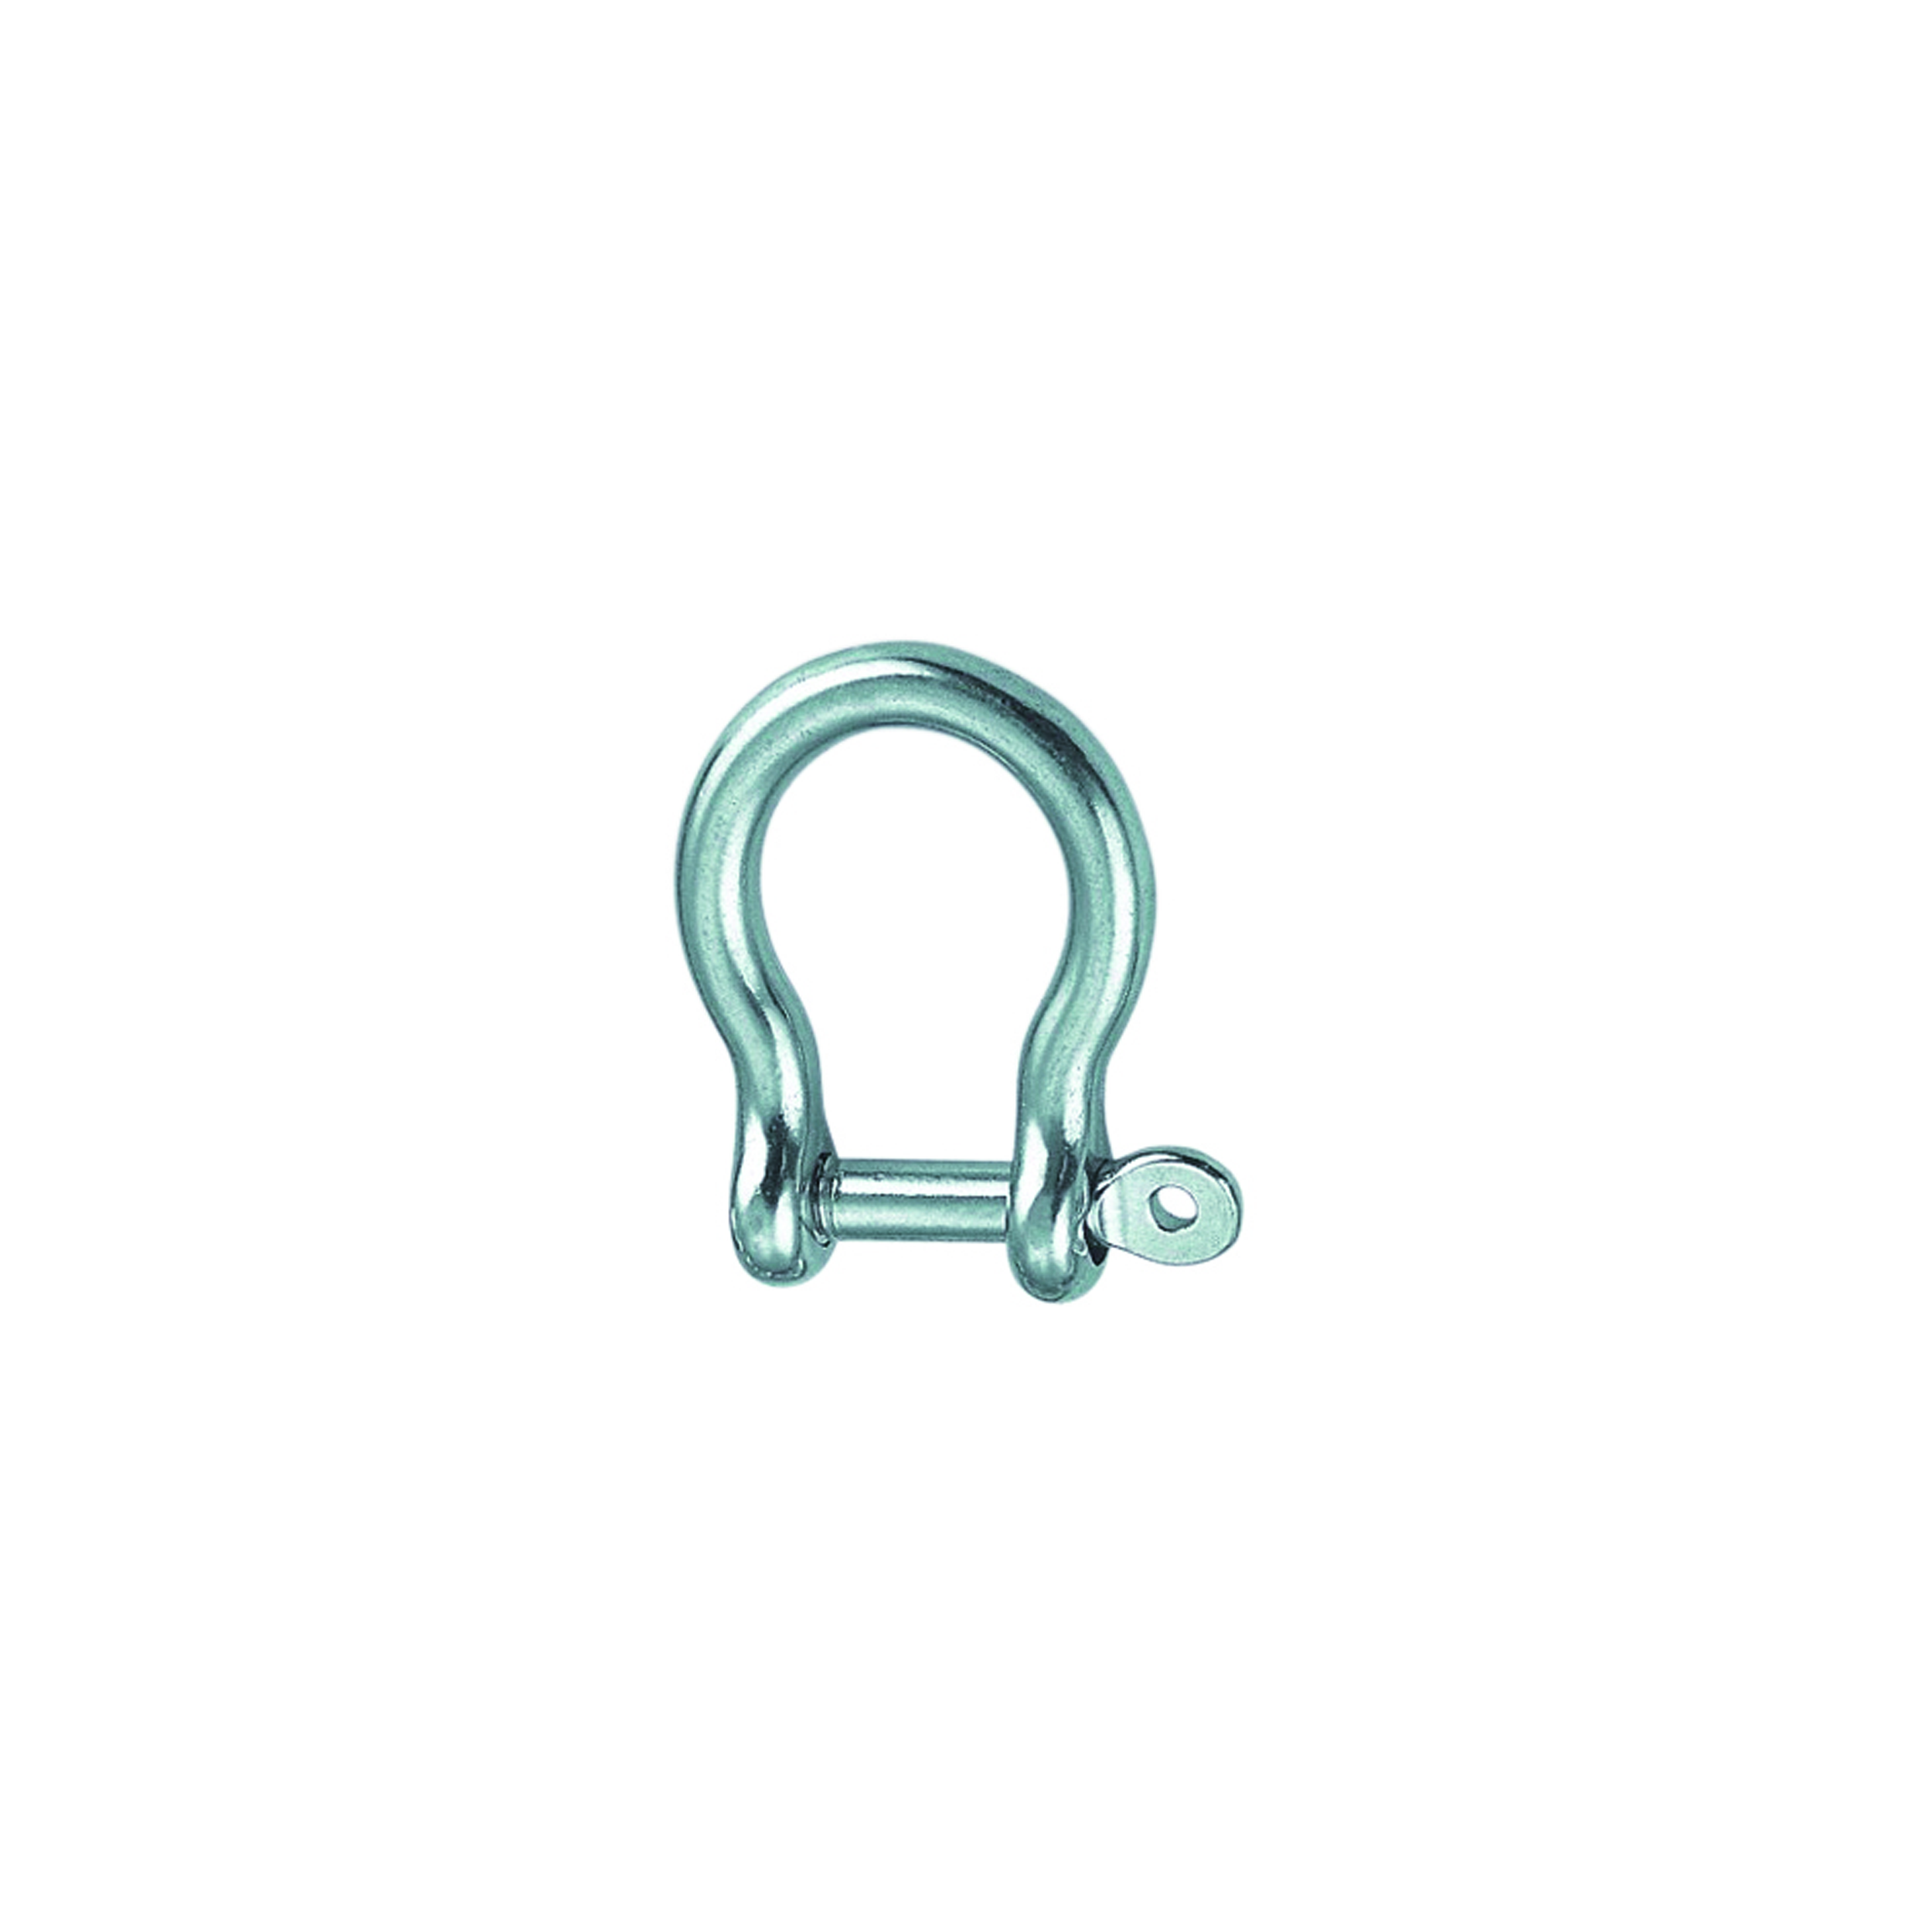 10 STCK / PCS. Bow shackle with captive pin A4  4mm